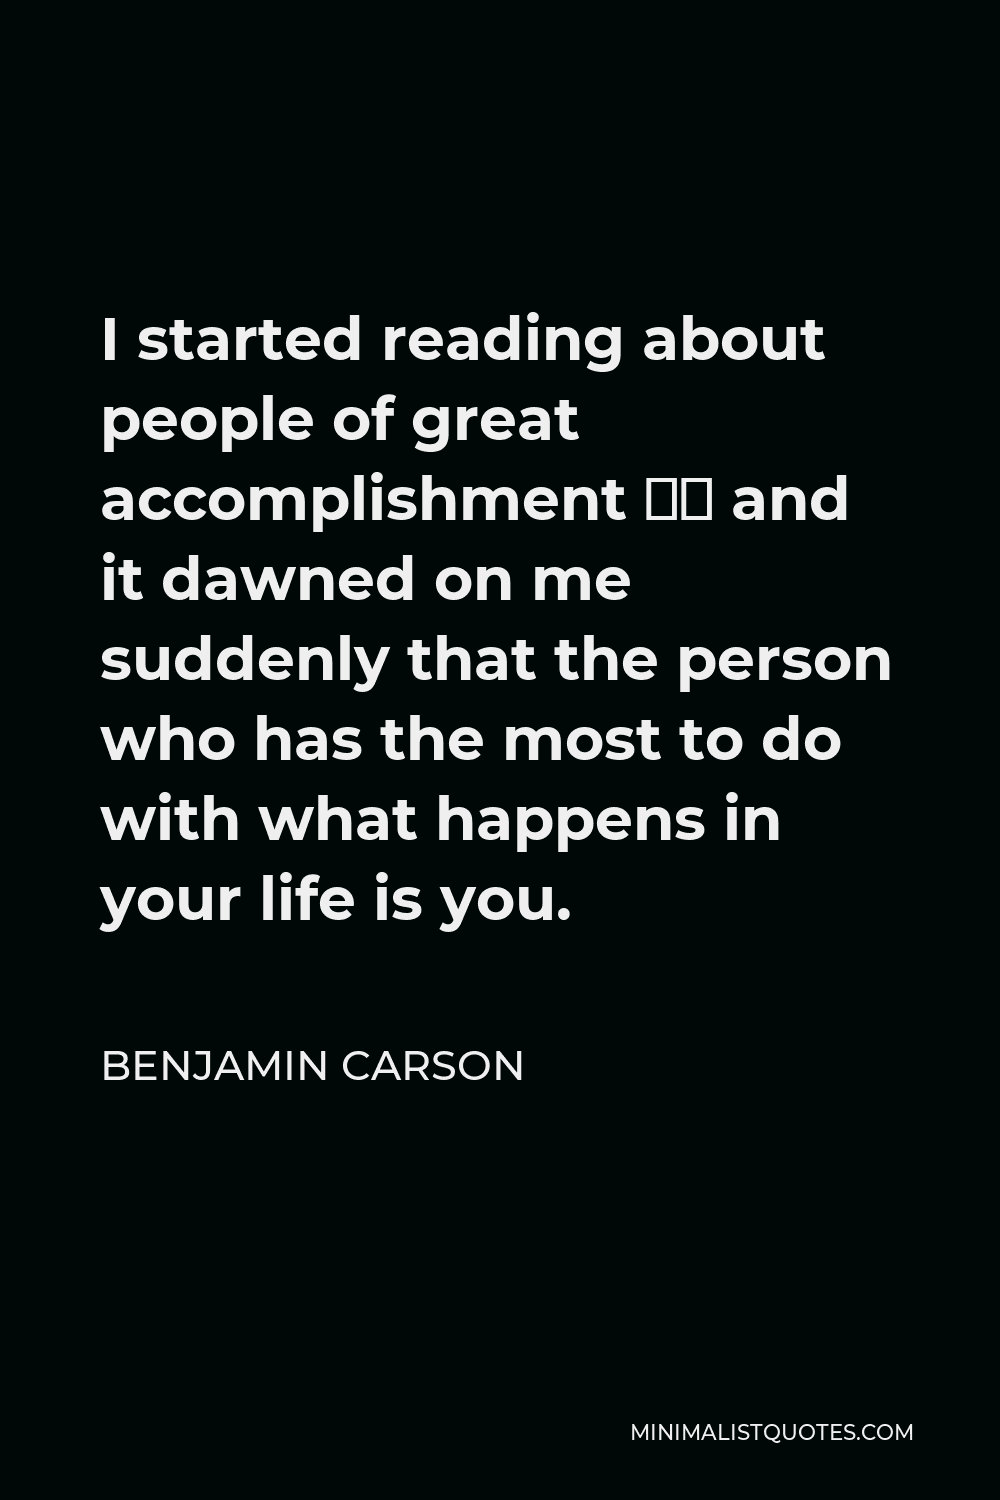 Benjamin Carson Quote - I started reading about people of great accomplishment … and it dawned on me suddenly that the person who has the most to do with what happens in your life is you.